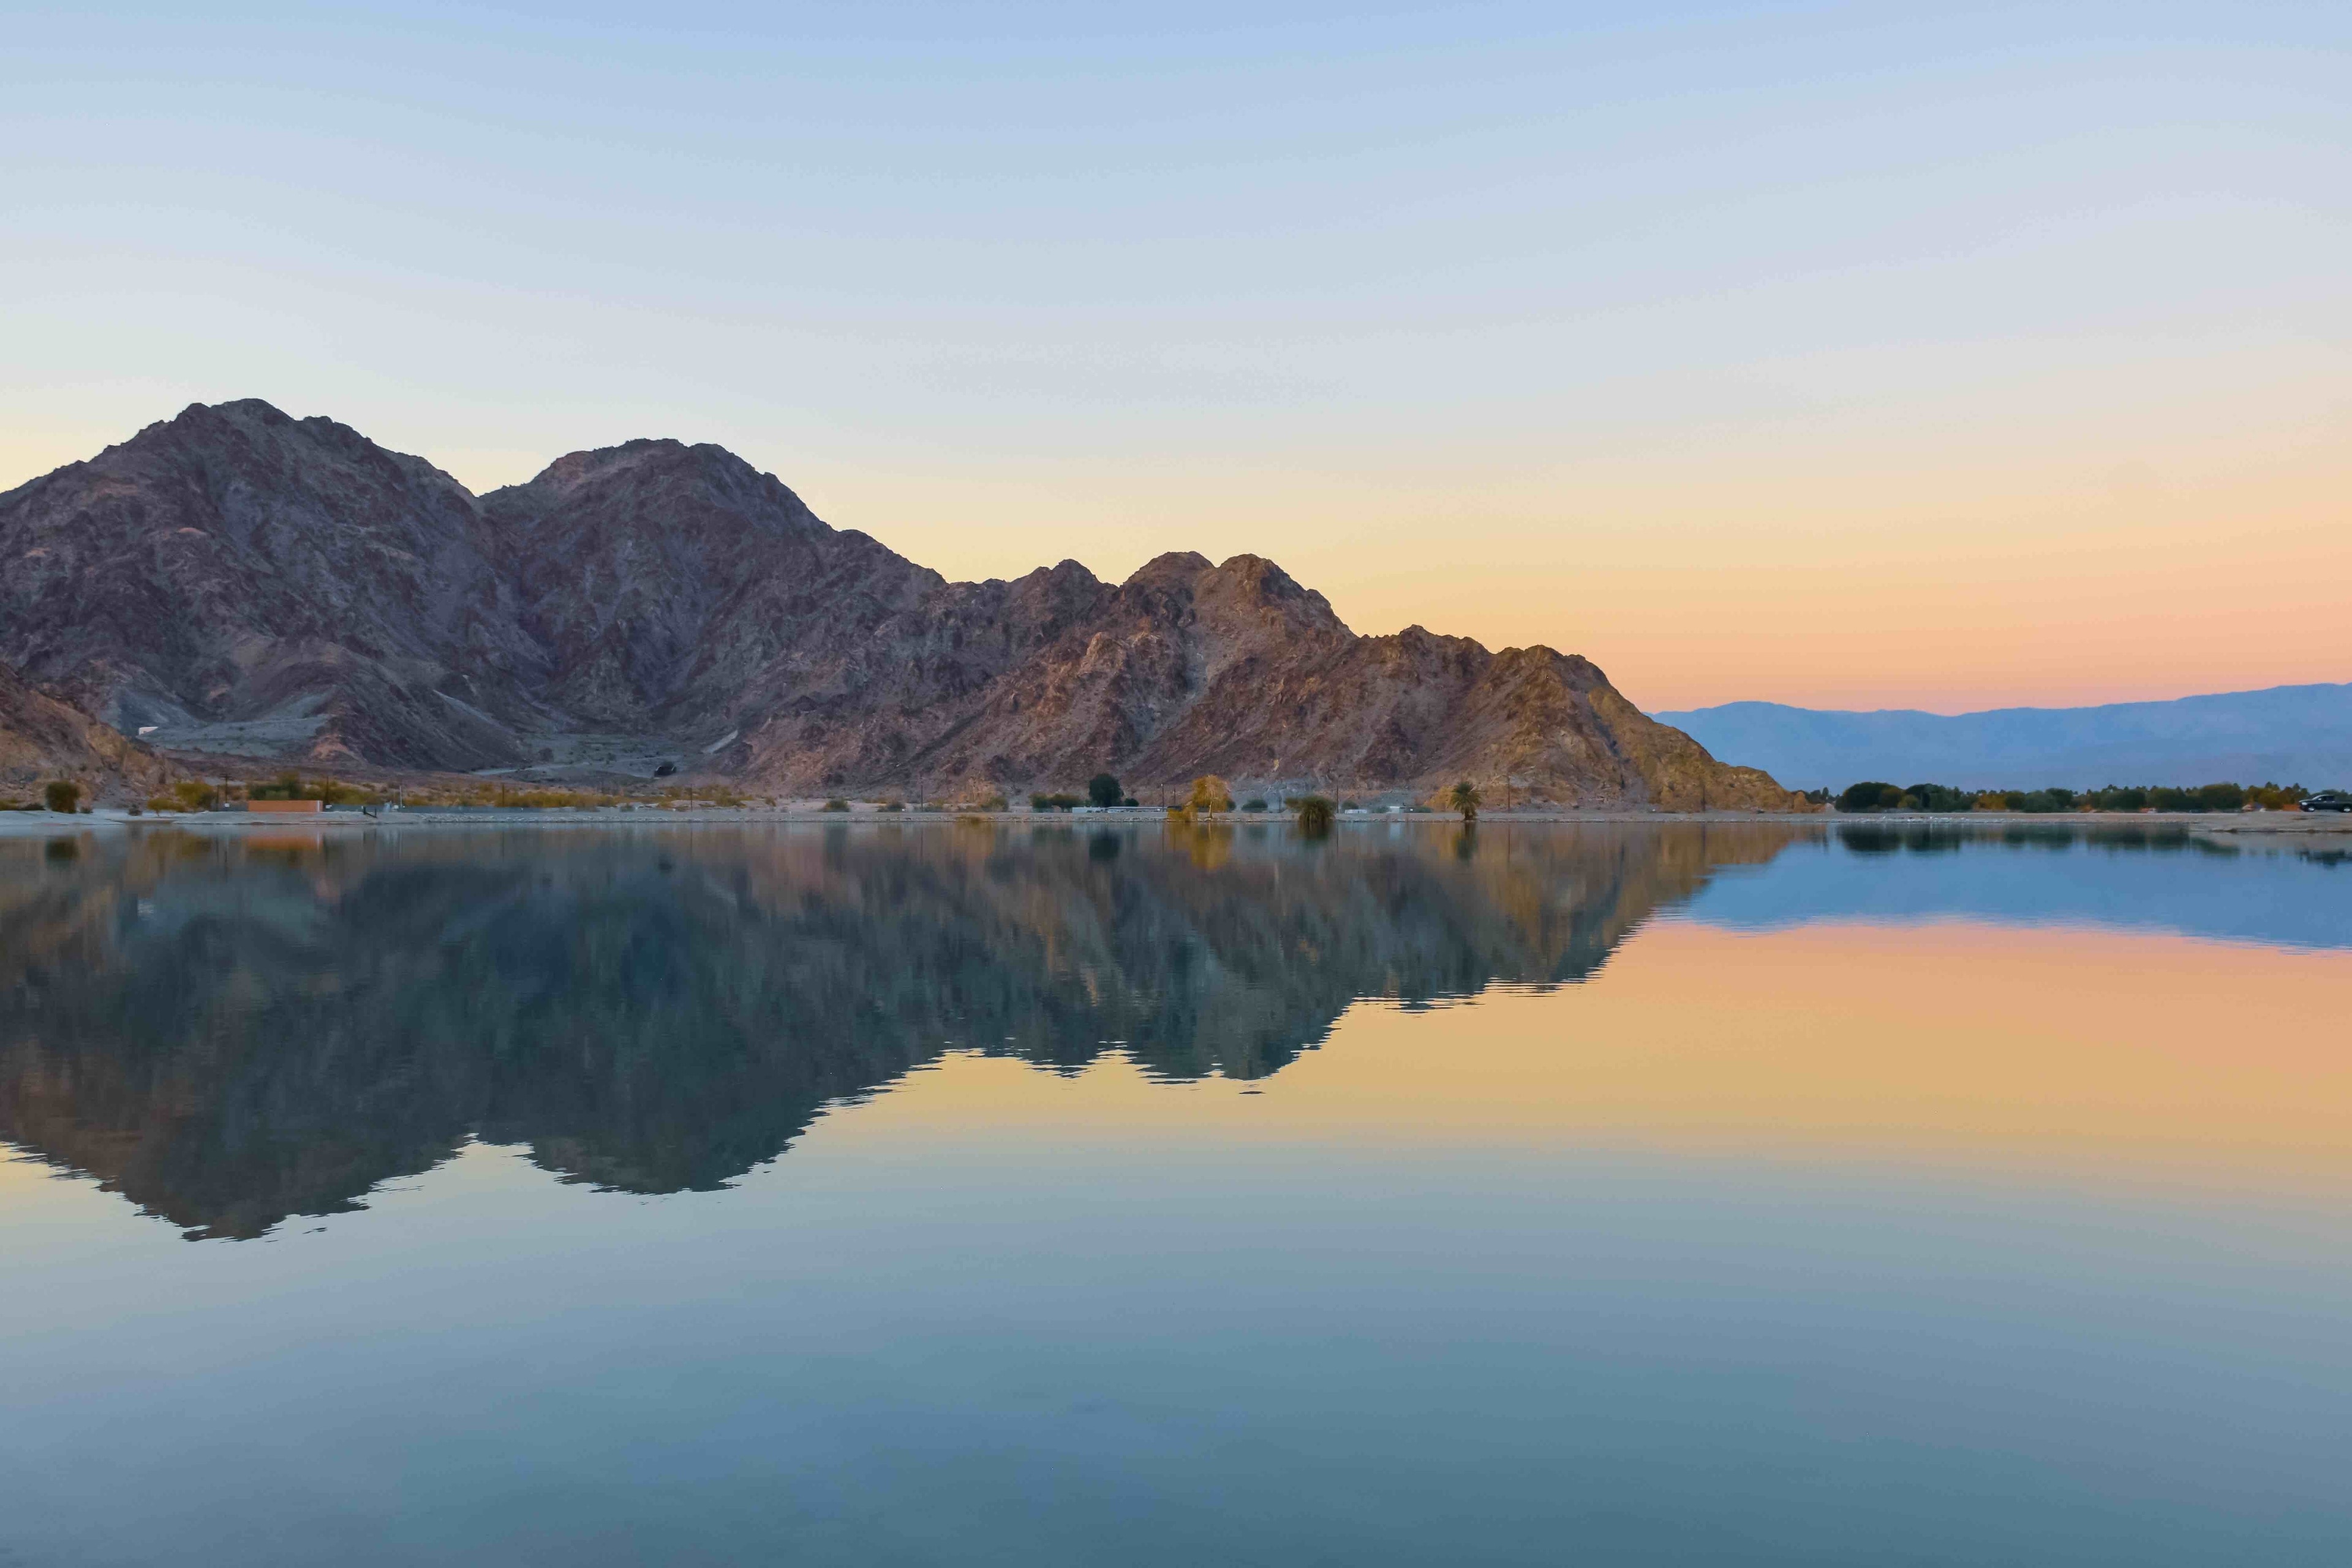 I love a good reflection. Reflection captures remind me the importance of reflecting on life 
#lake #cahuilla #sunset #reflection #laquinta #palmdesert #desert #california #mountain #canyon #colors #perspective